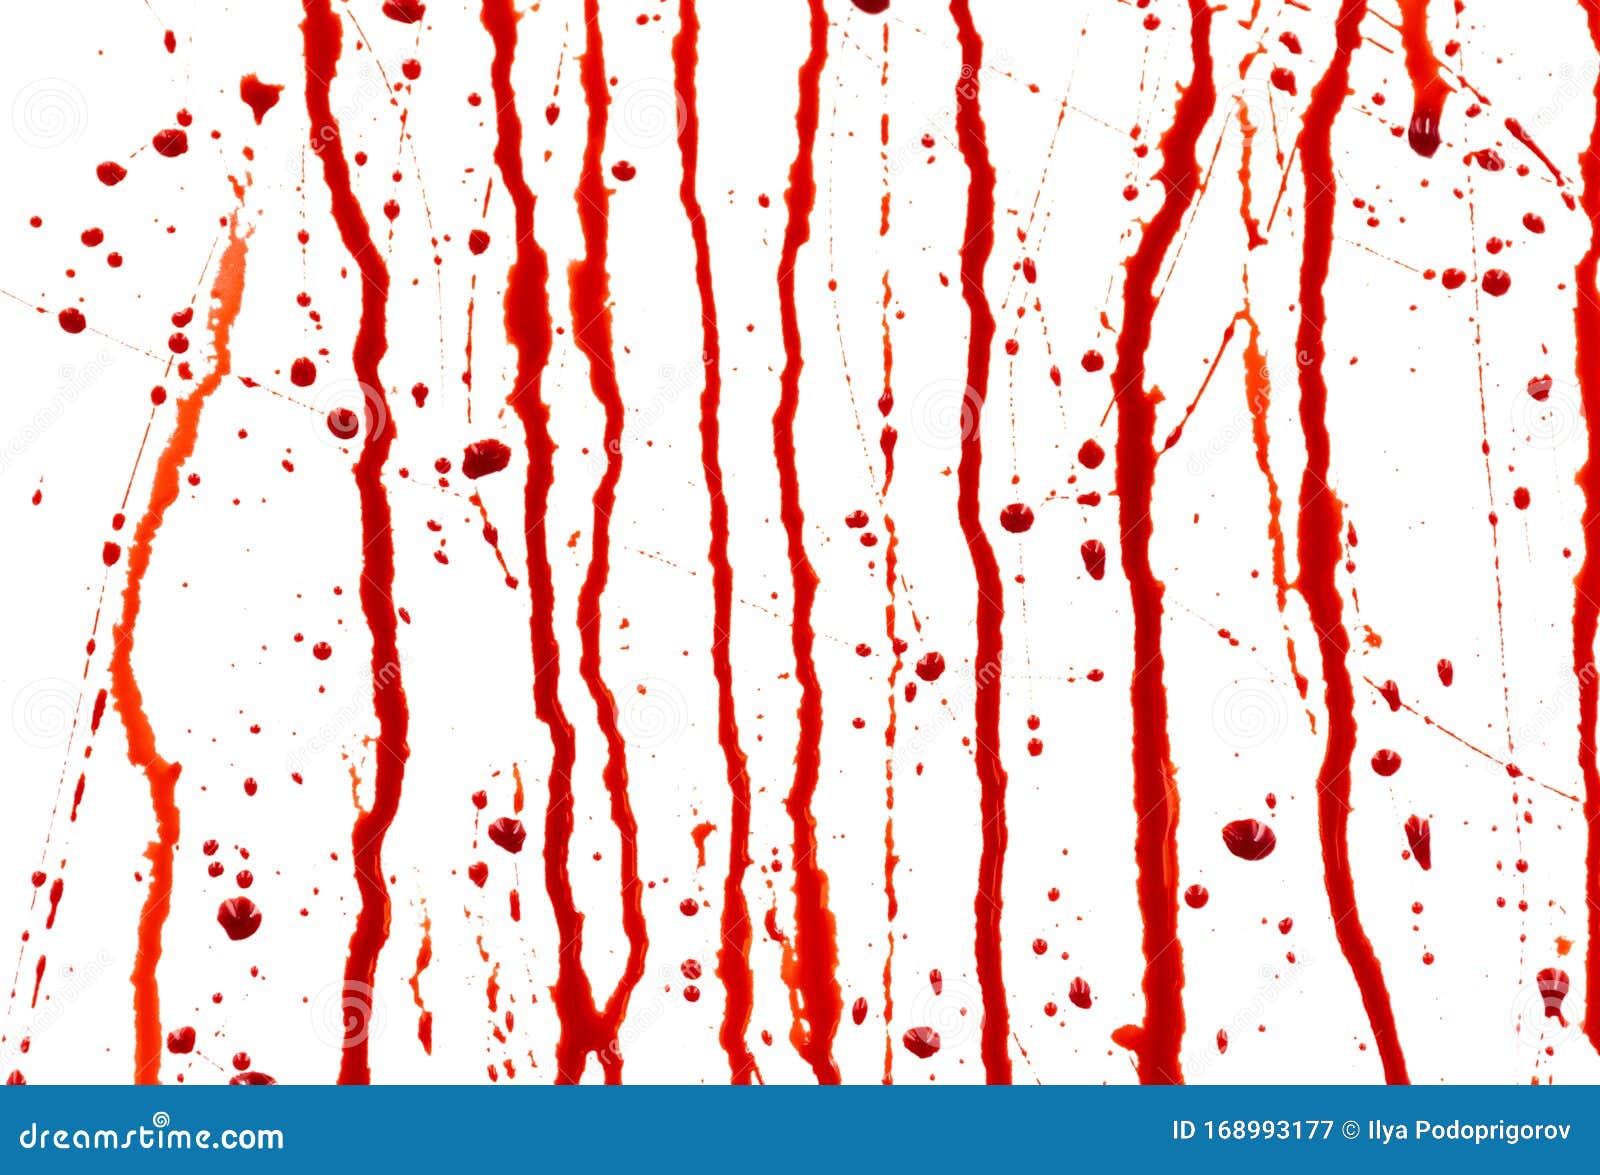 Dripping Blood Isolated on White Background. Flowing Red Blood Splashes,  Drops and Trail Stock Image - Image of abstract, drips: 168993177